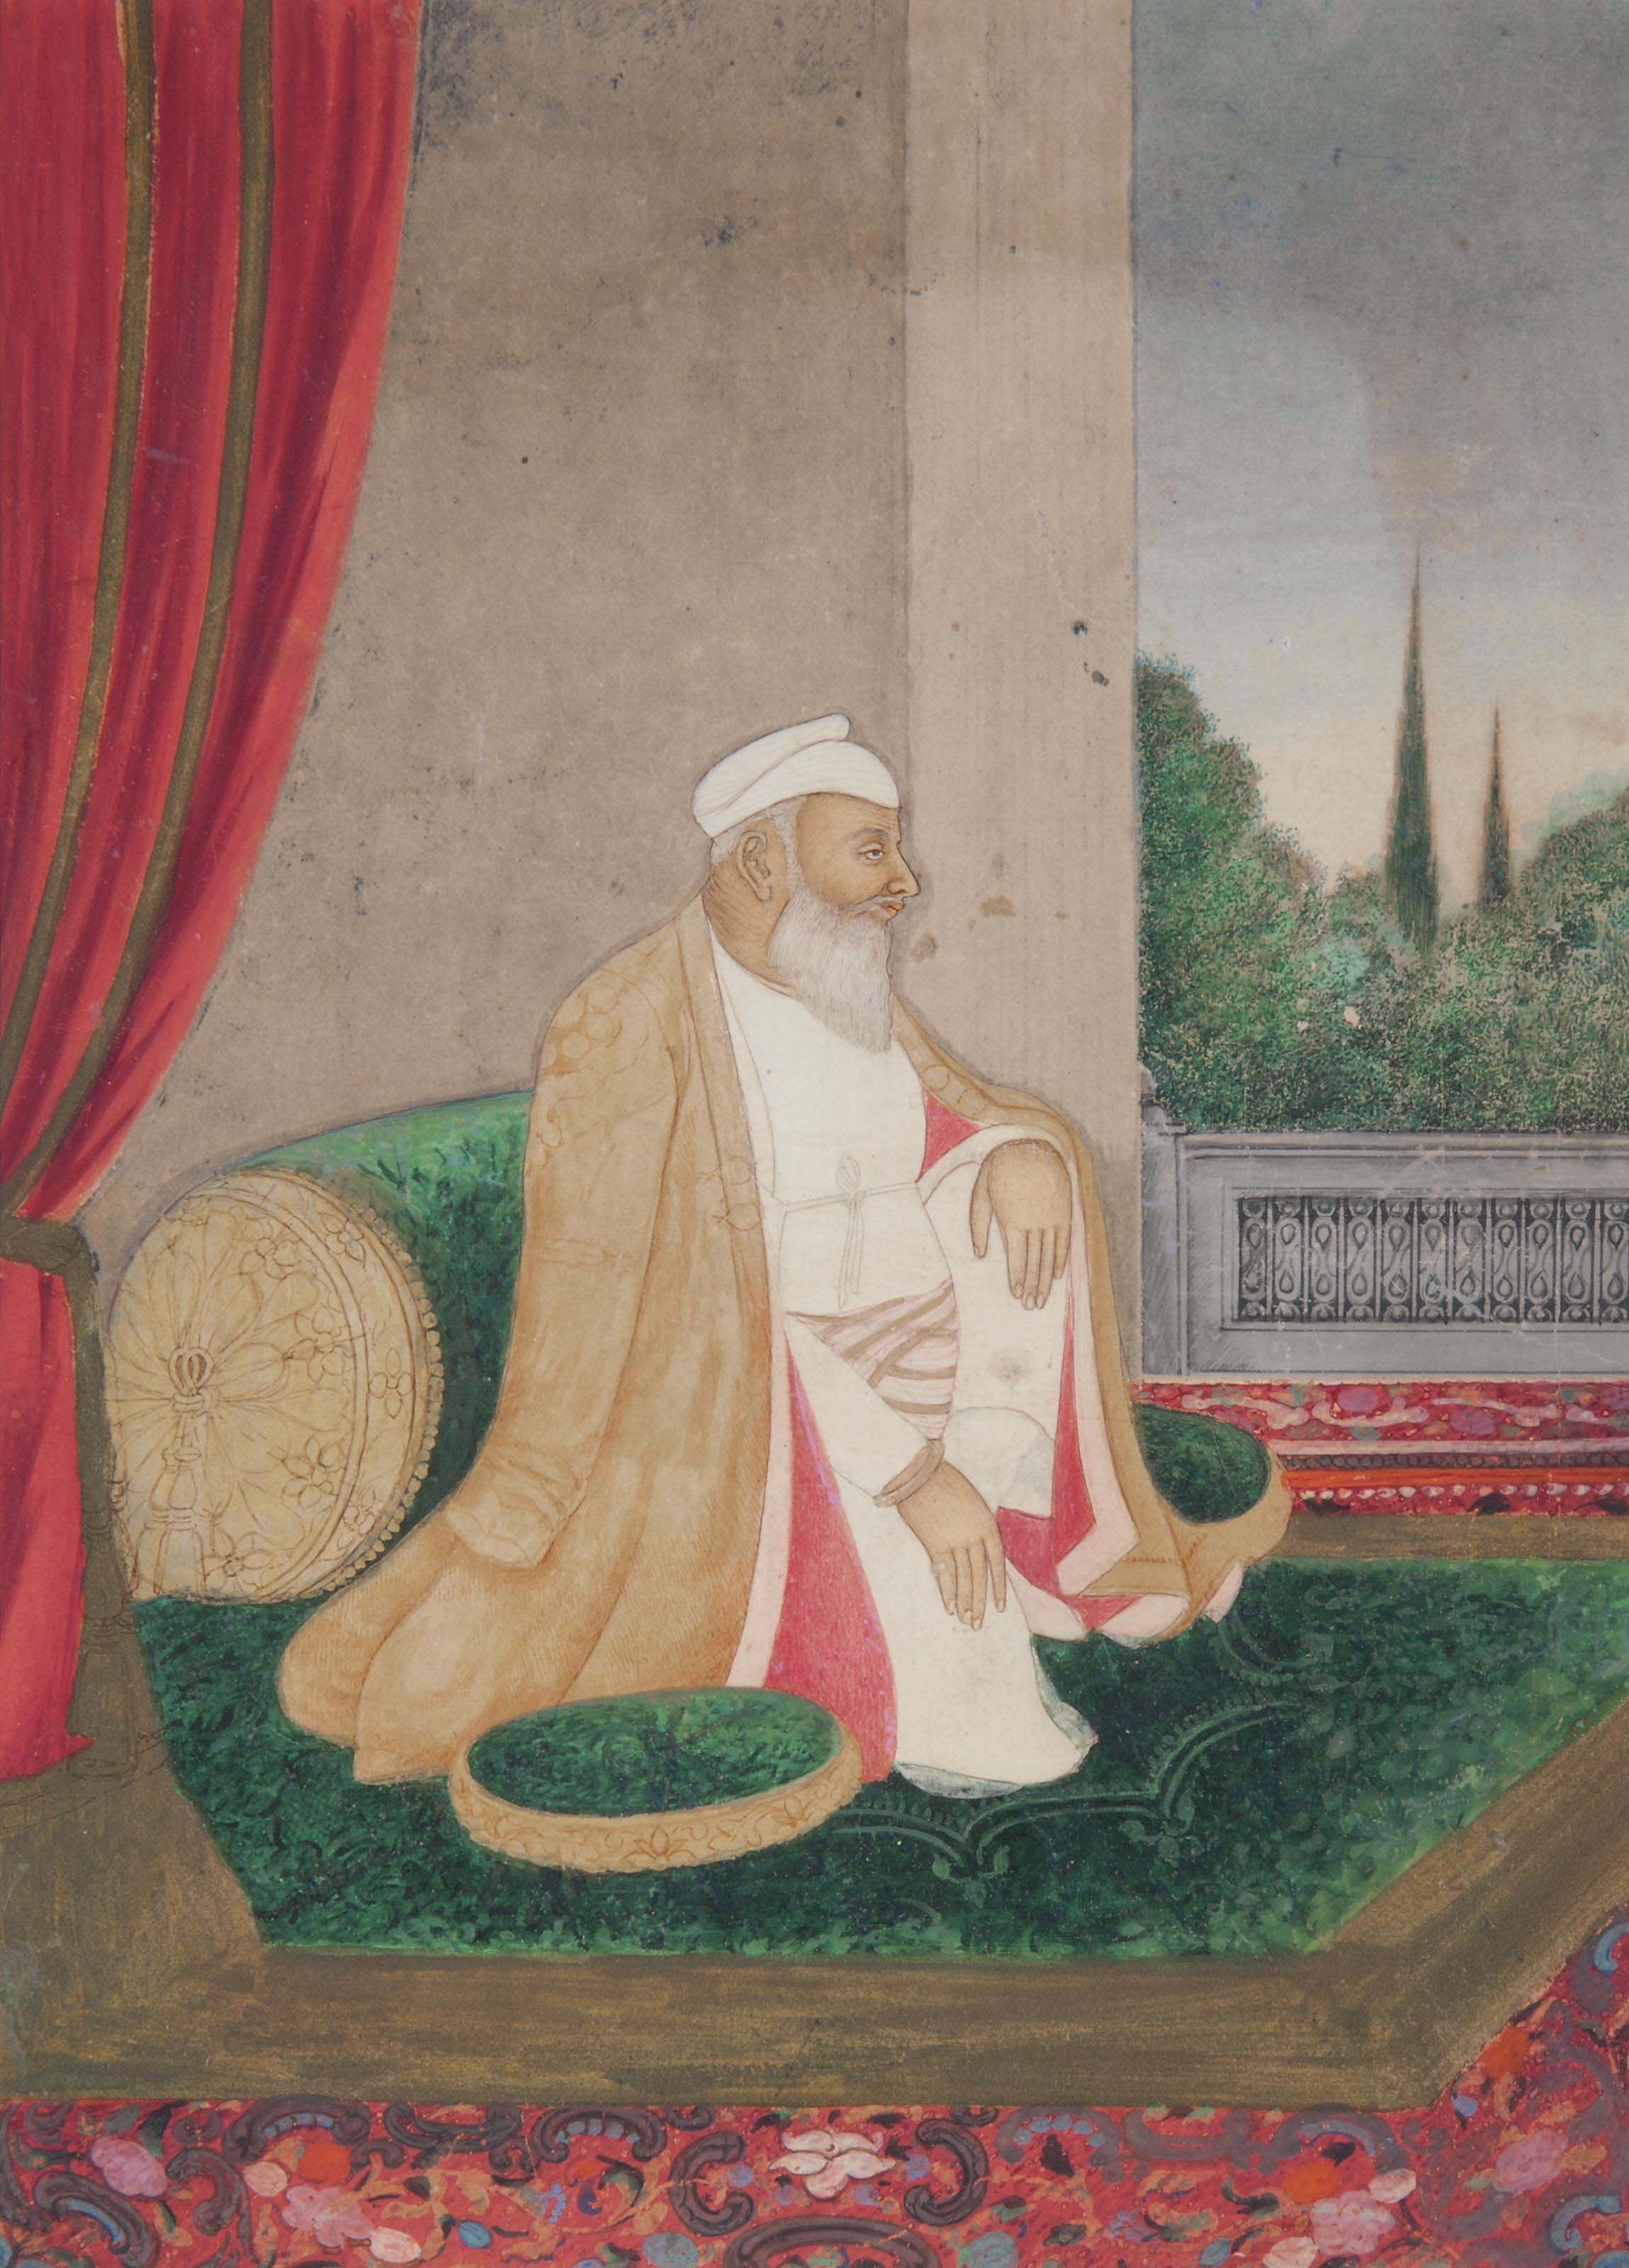 PORTRAIT OF A SIKH NOBLE by Indian School, 19th Century, LATE 18TH/EARLY 19TH CENTURY